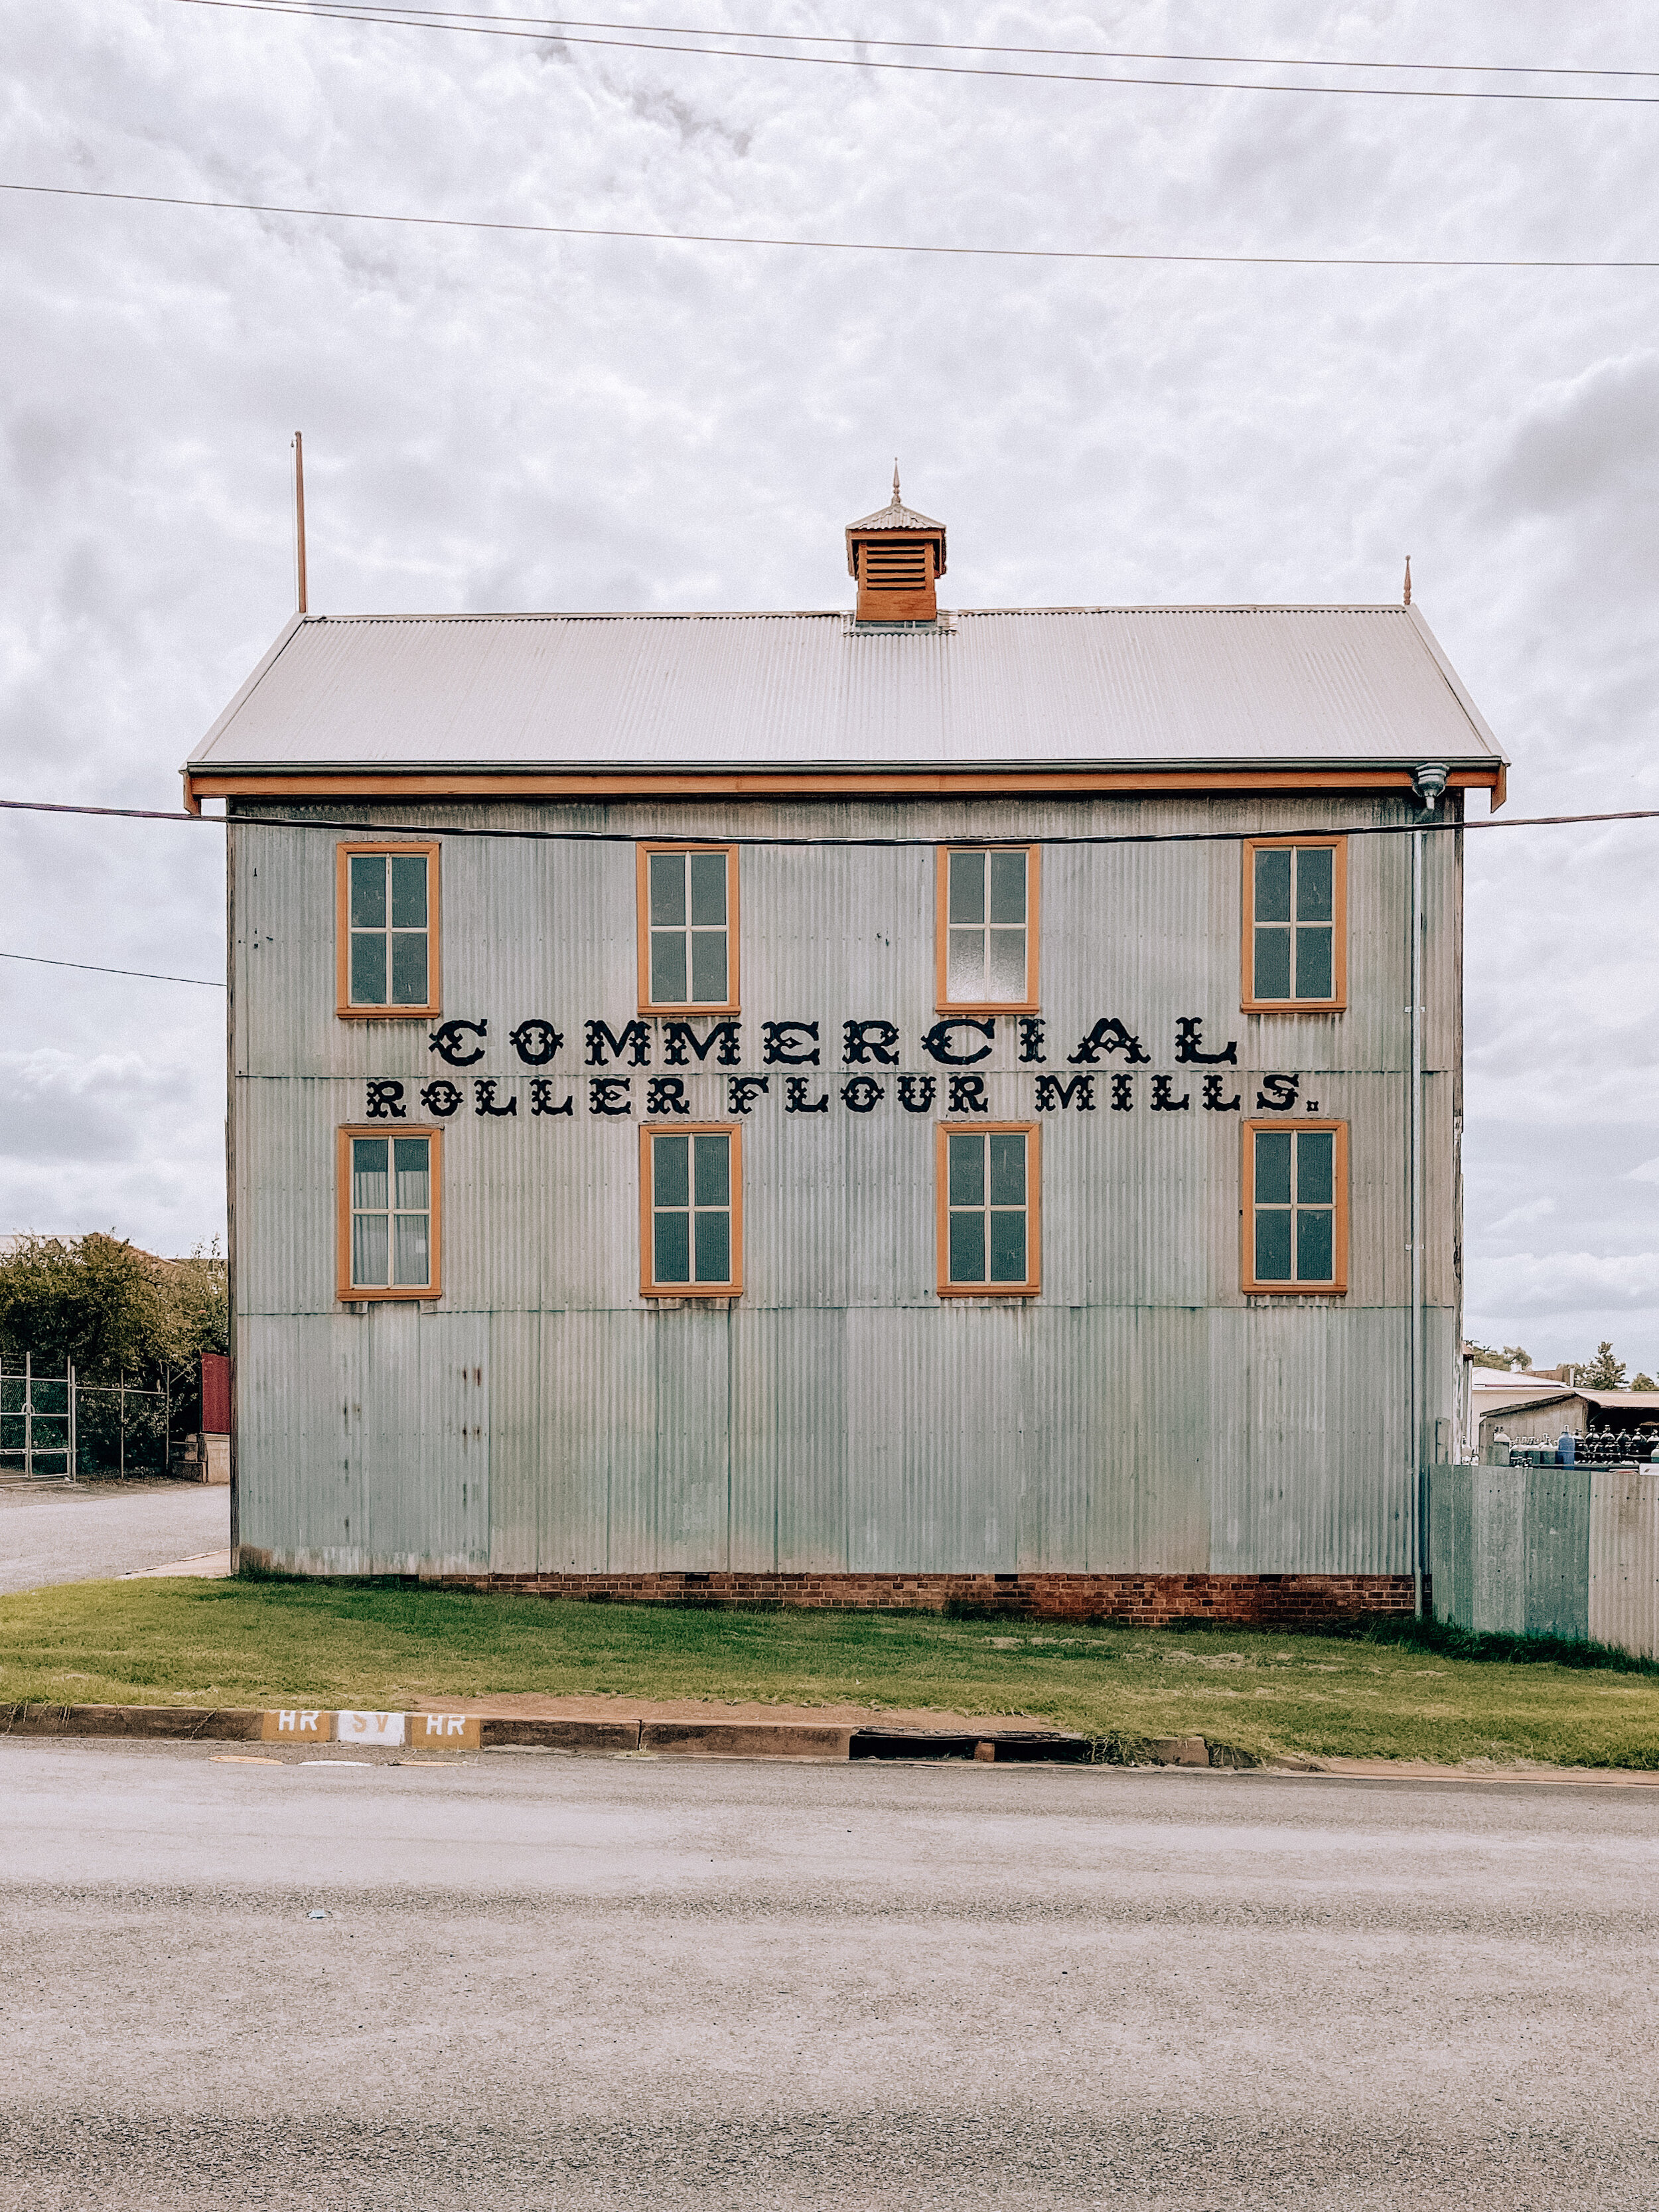 Commercial roller flour mills - Gulgong - New South Wales (NSW) - Australia